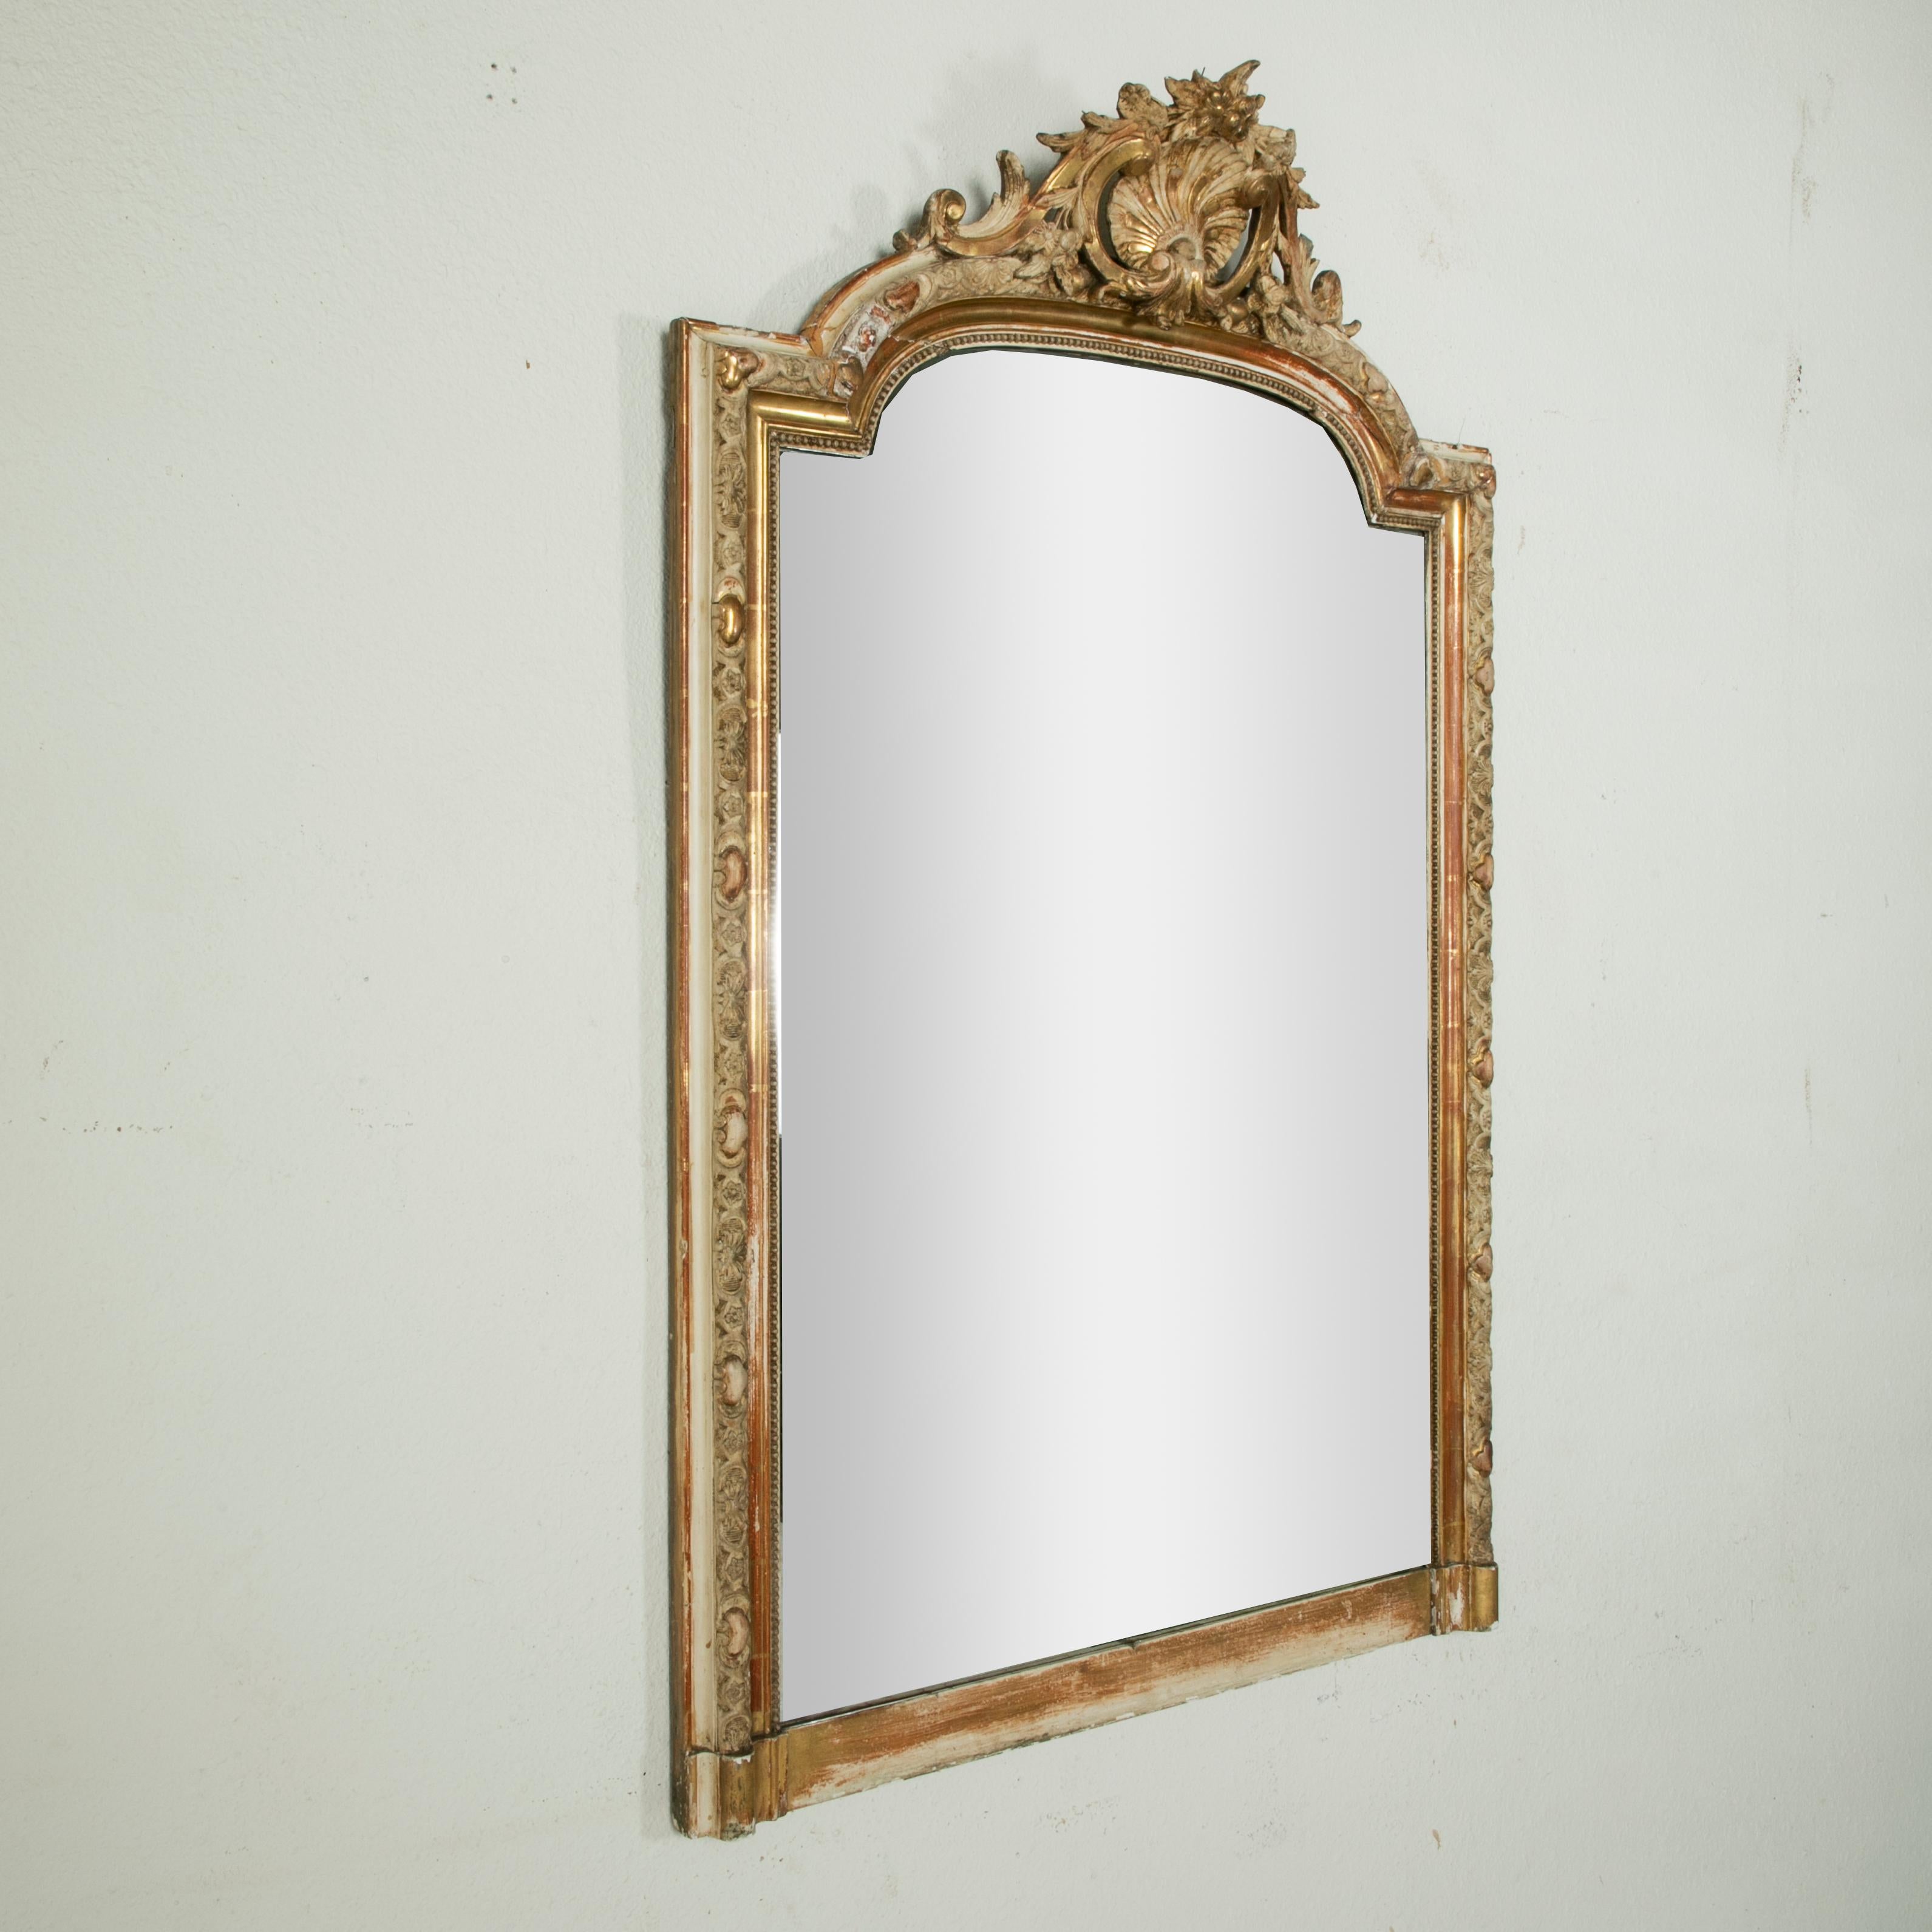 Late 18th Century French Regency Style Painted Gilt Wood Mantel Mirror 1